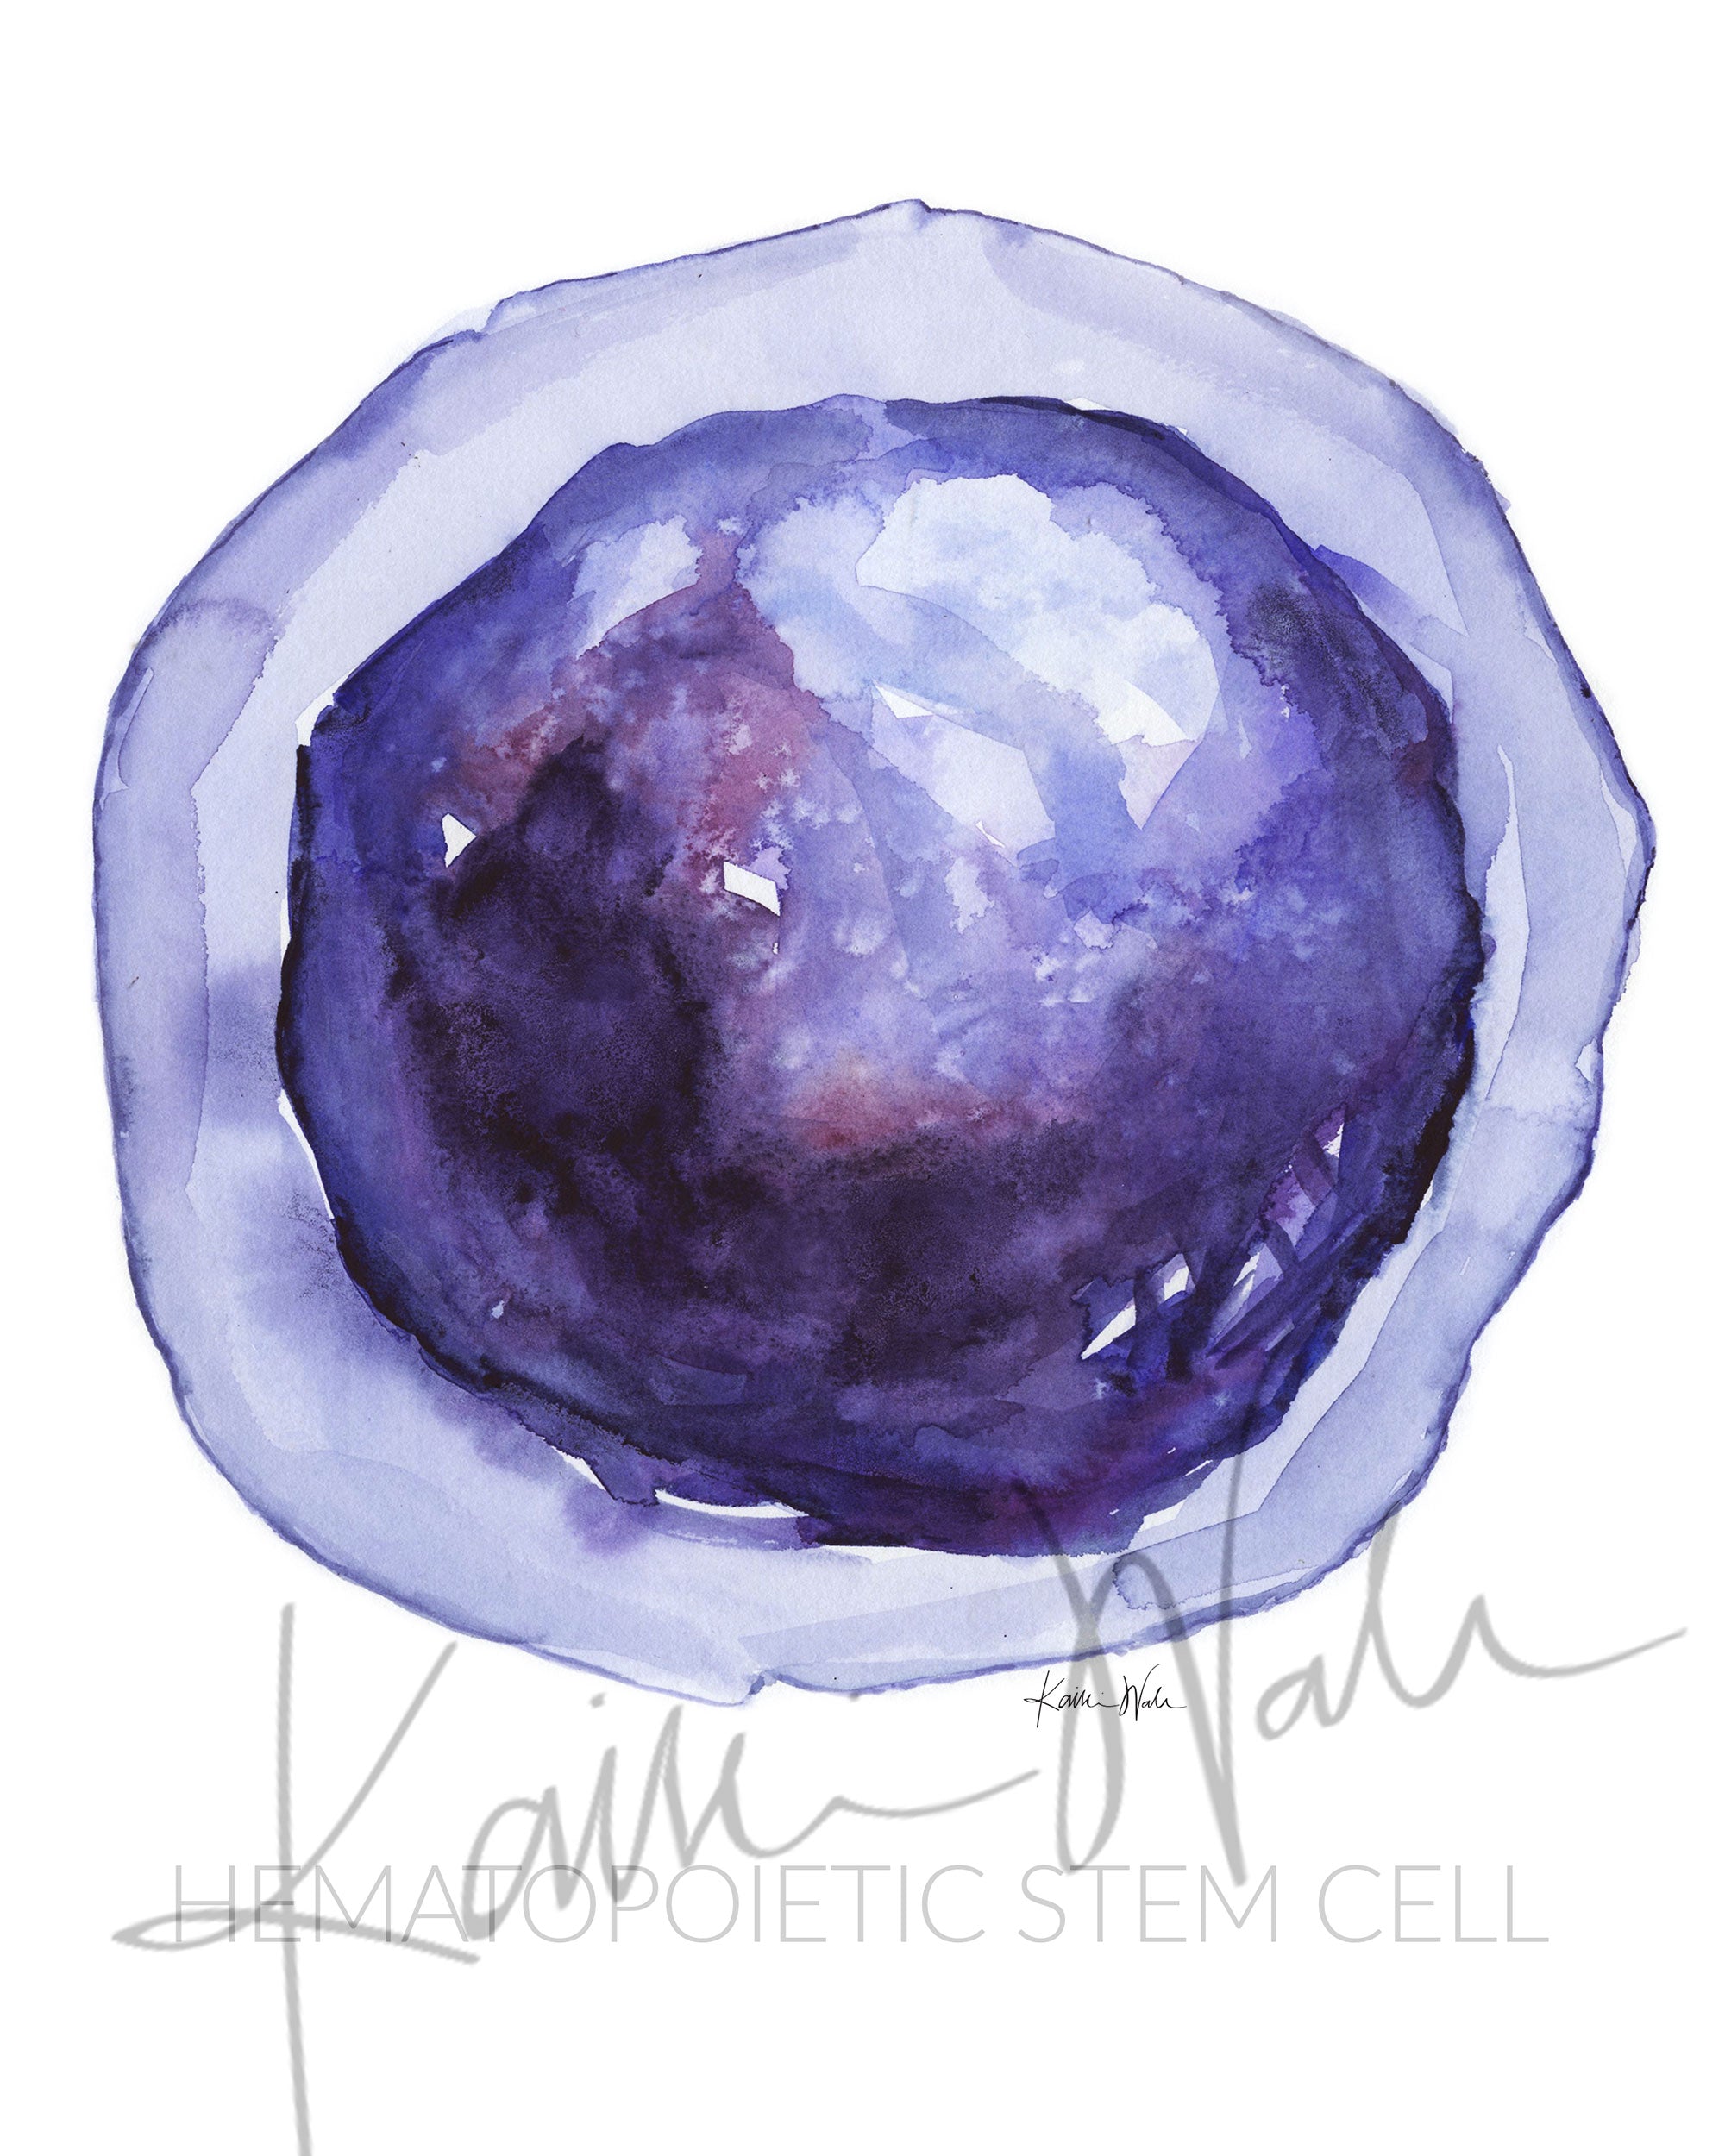 Unframed watercolor painting of Hemaopoietic Stem Cell.